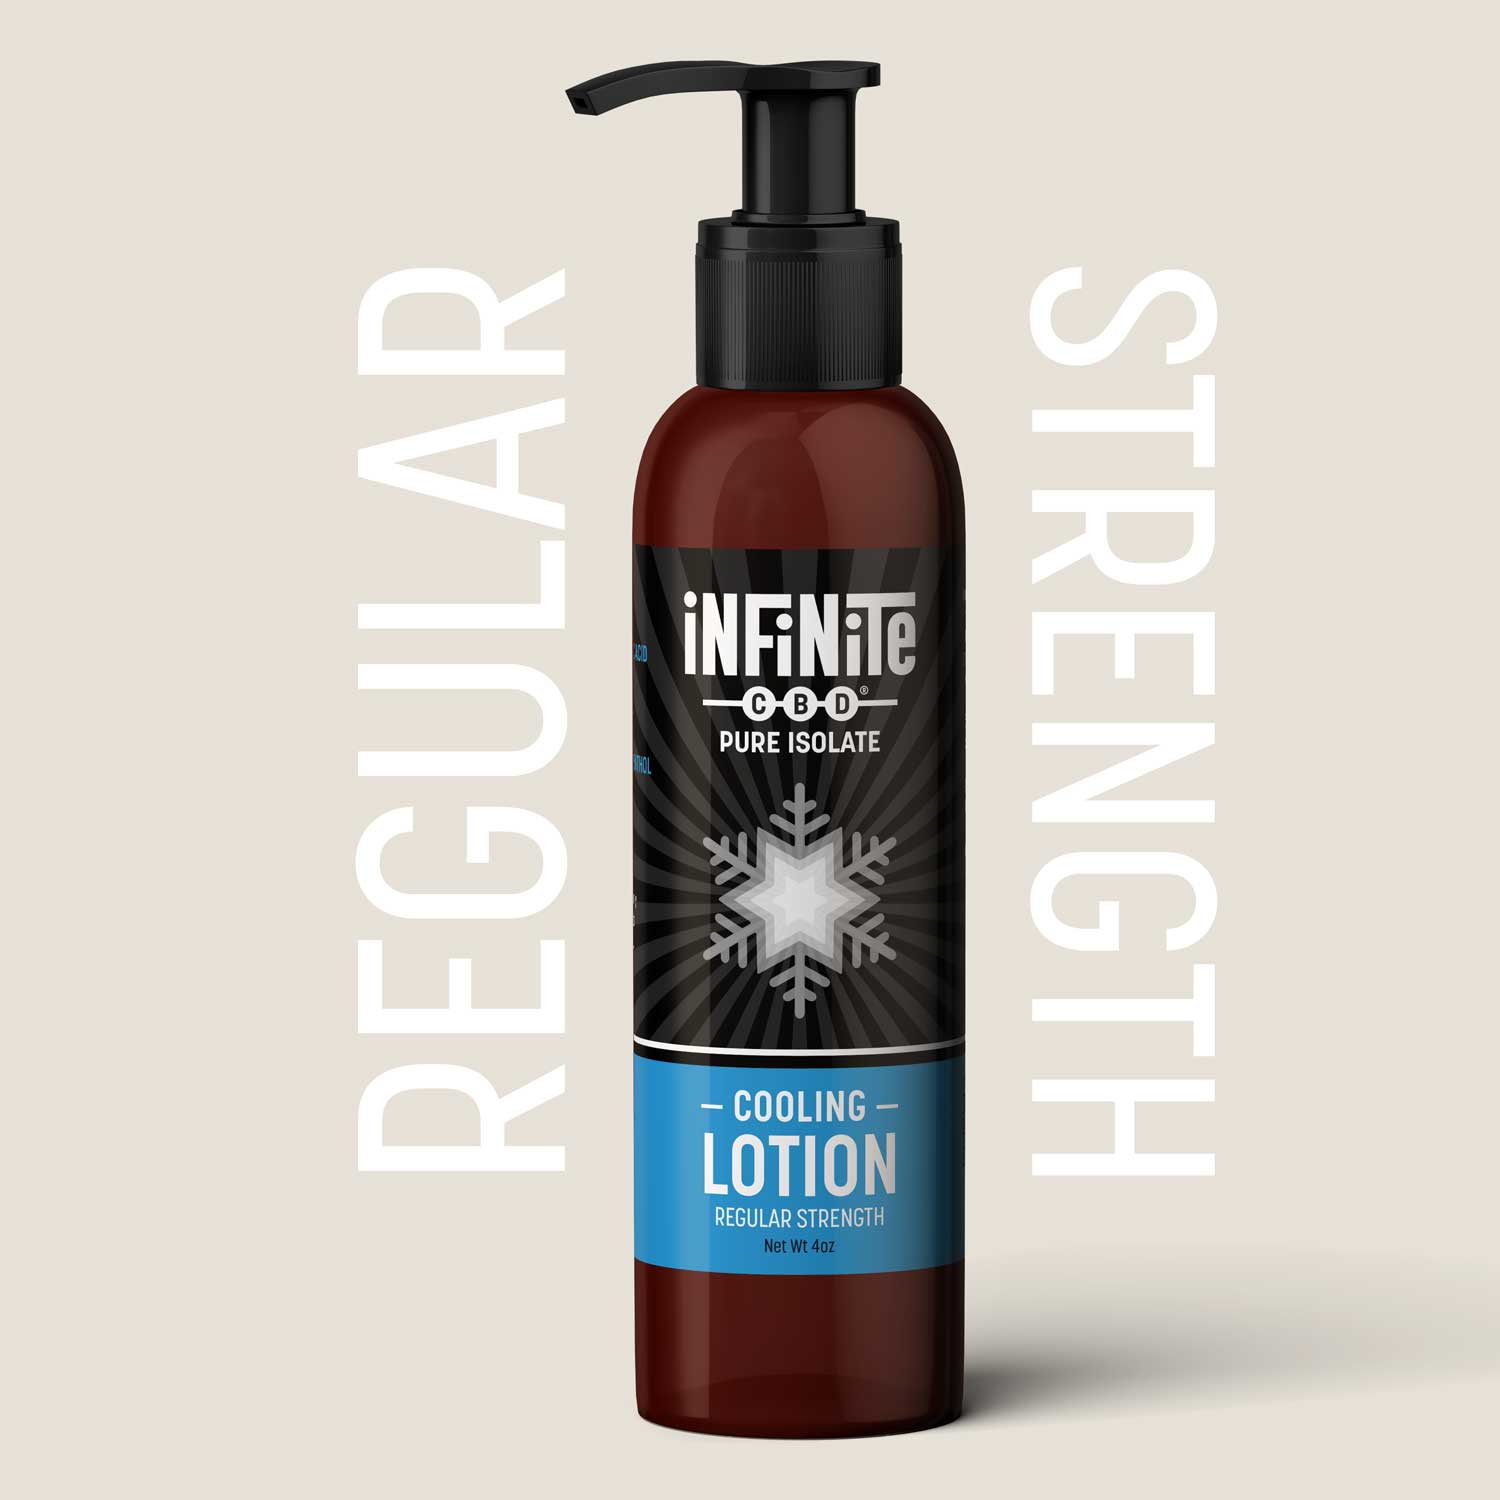 Topical Lotion<br>Formulation: Cooling<br>CBD: Pure Isolate (Zero THC)<br>Strength: Regular (500mg/bottle)